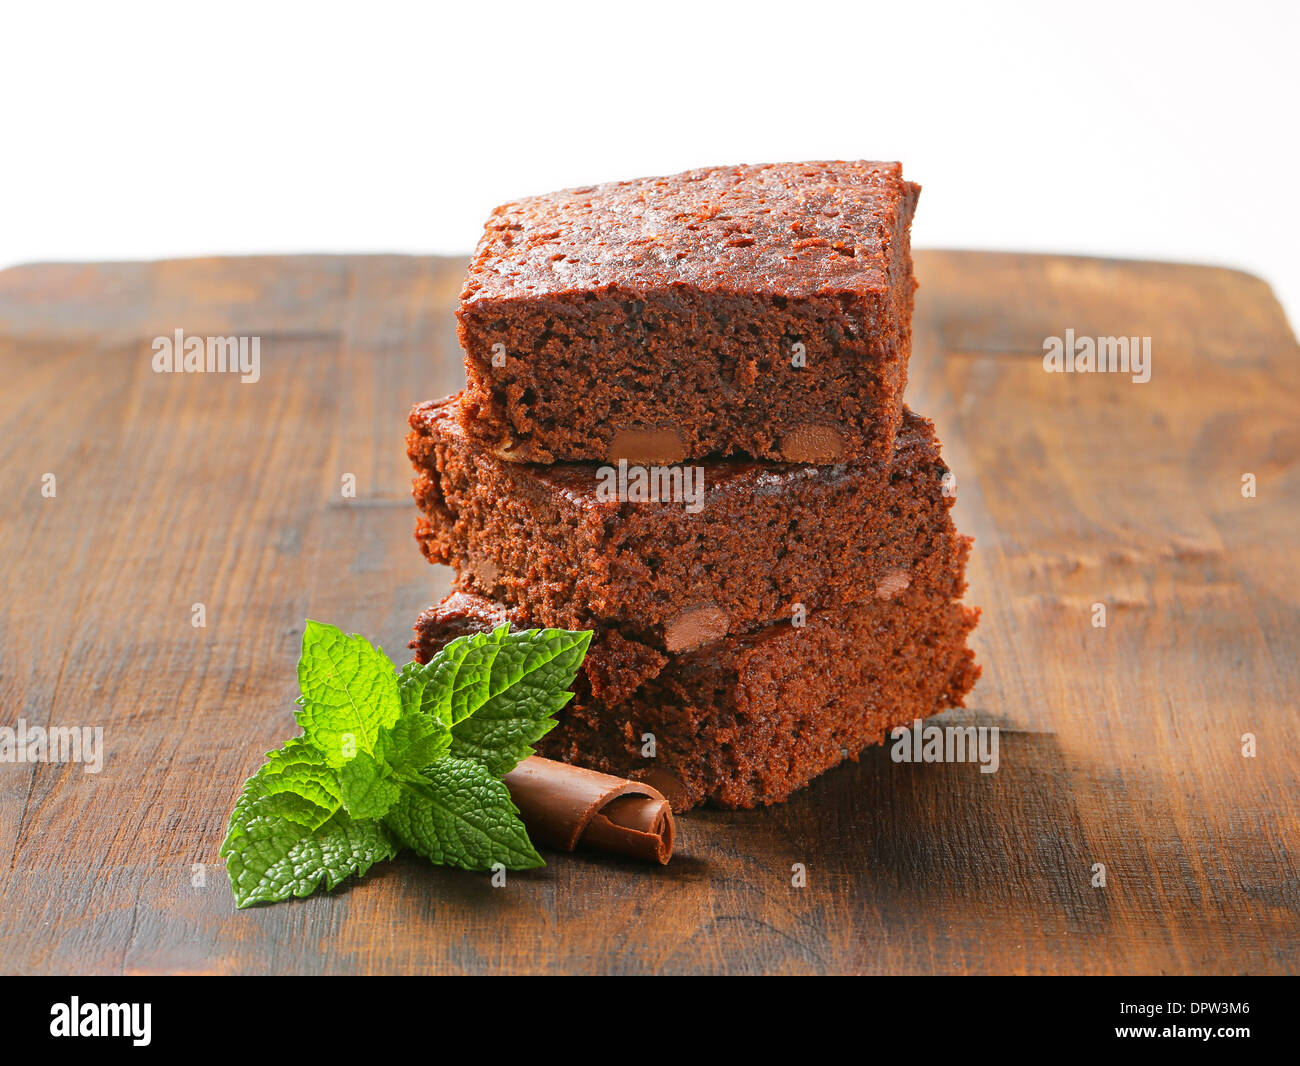 Pile of Fudgy Chocolate Chip Brownies Stock Photo